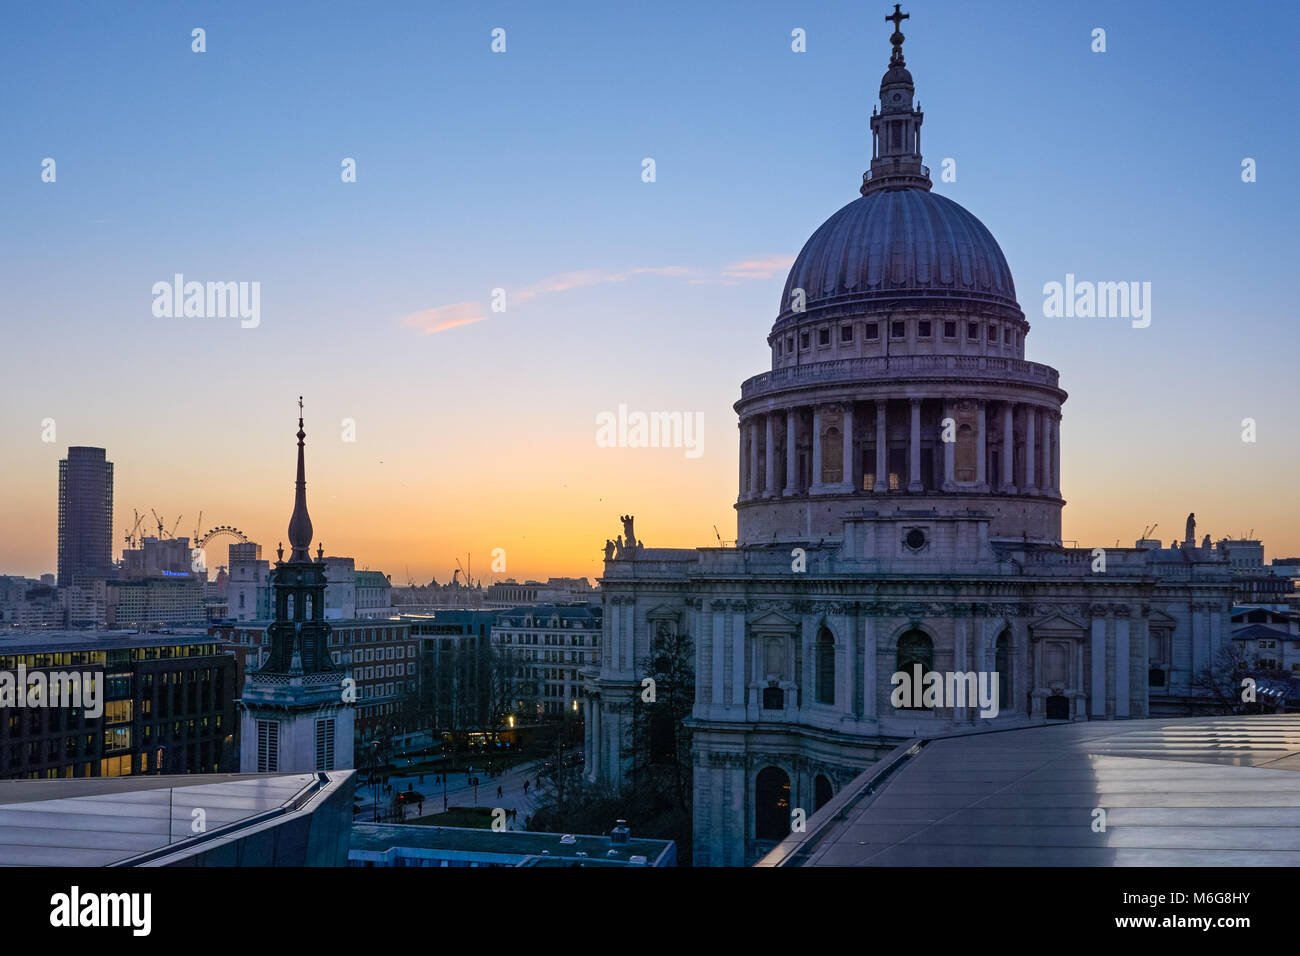 St Paul's Cathedral seen from One New Change in London England United Kingdom UK Stock Photo